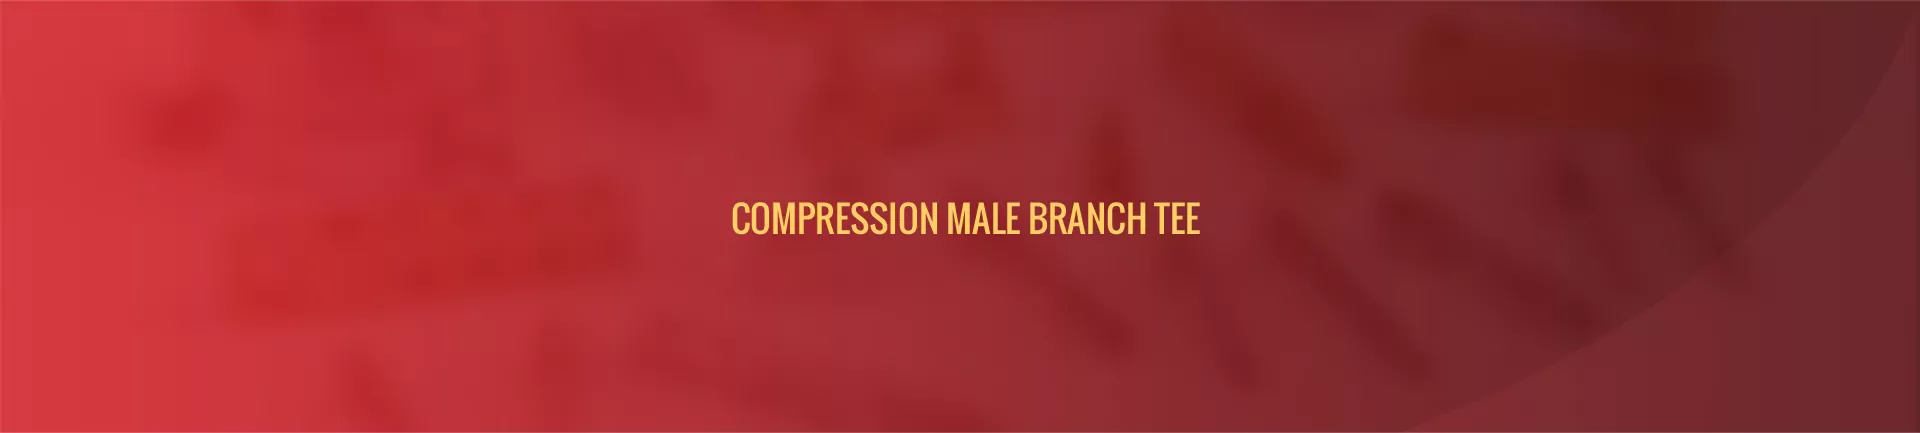 compression-male-branch-tee-banner